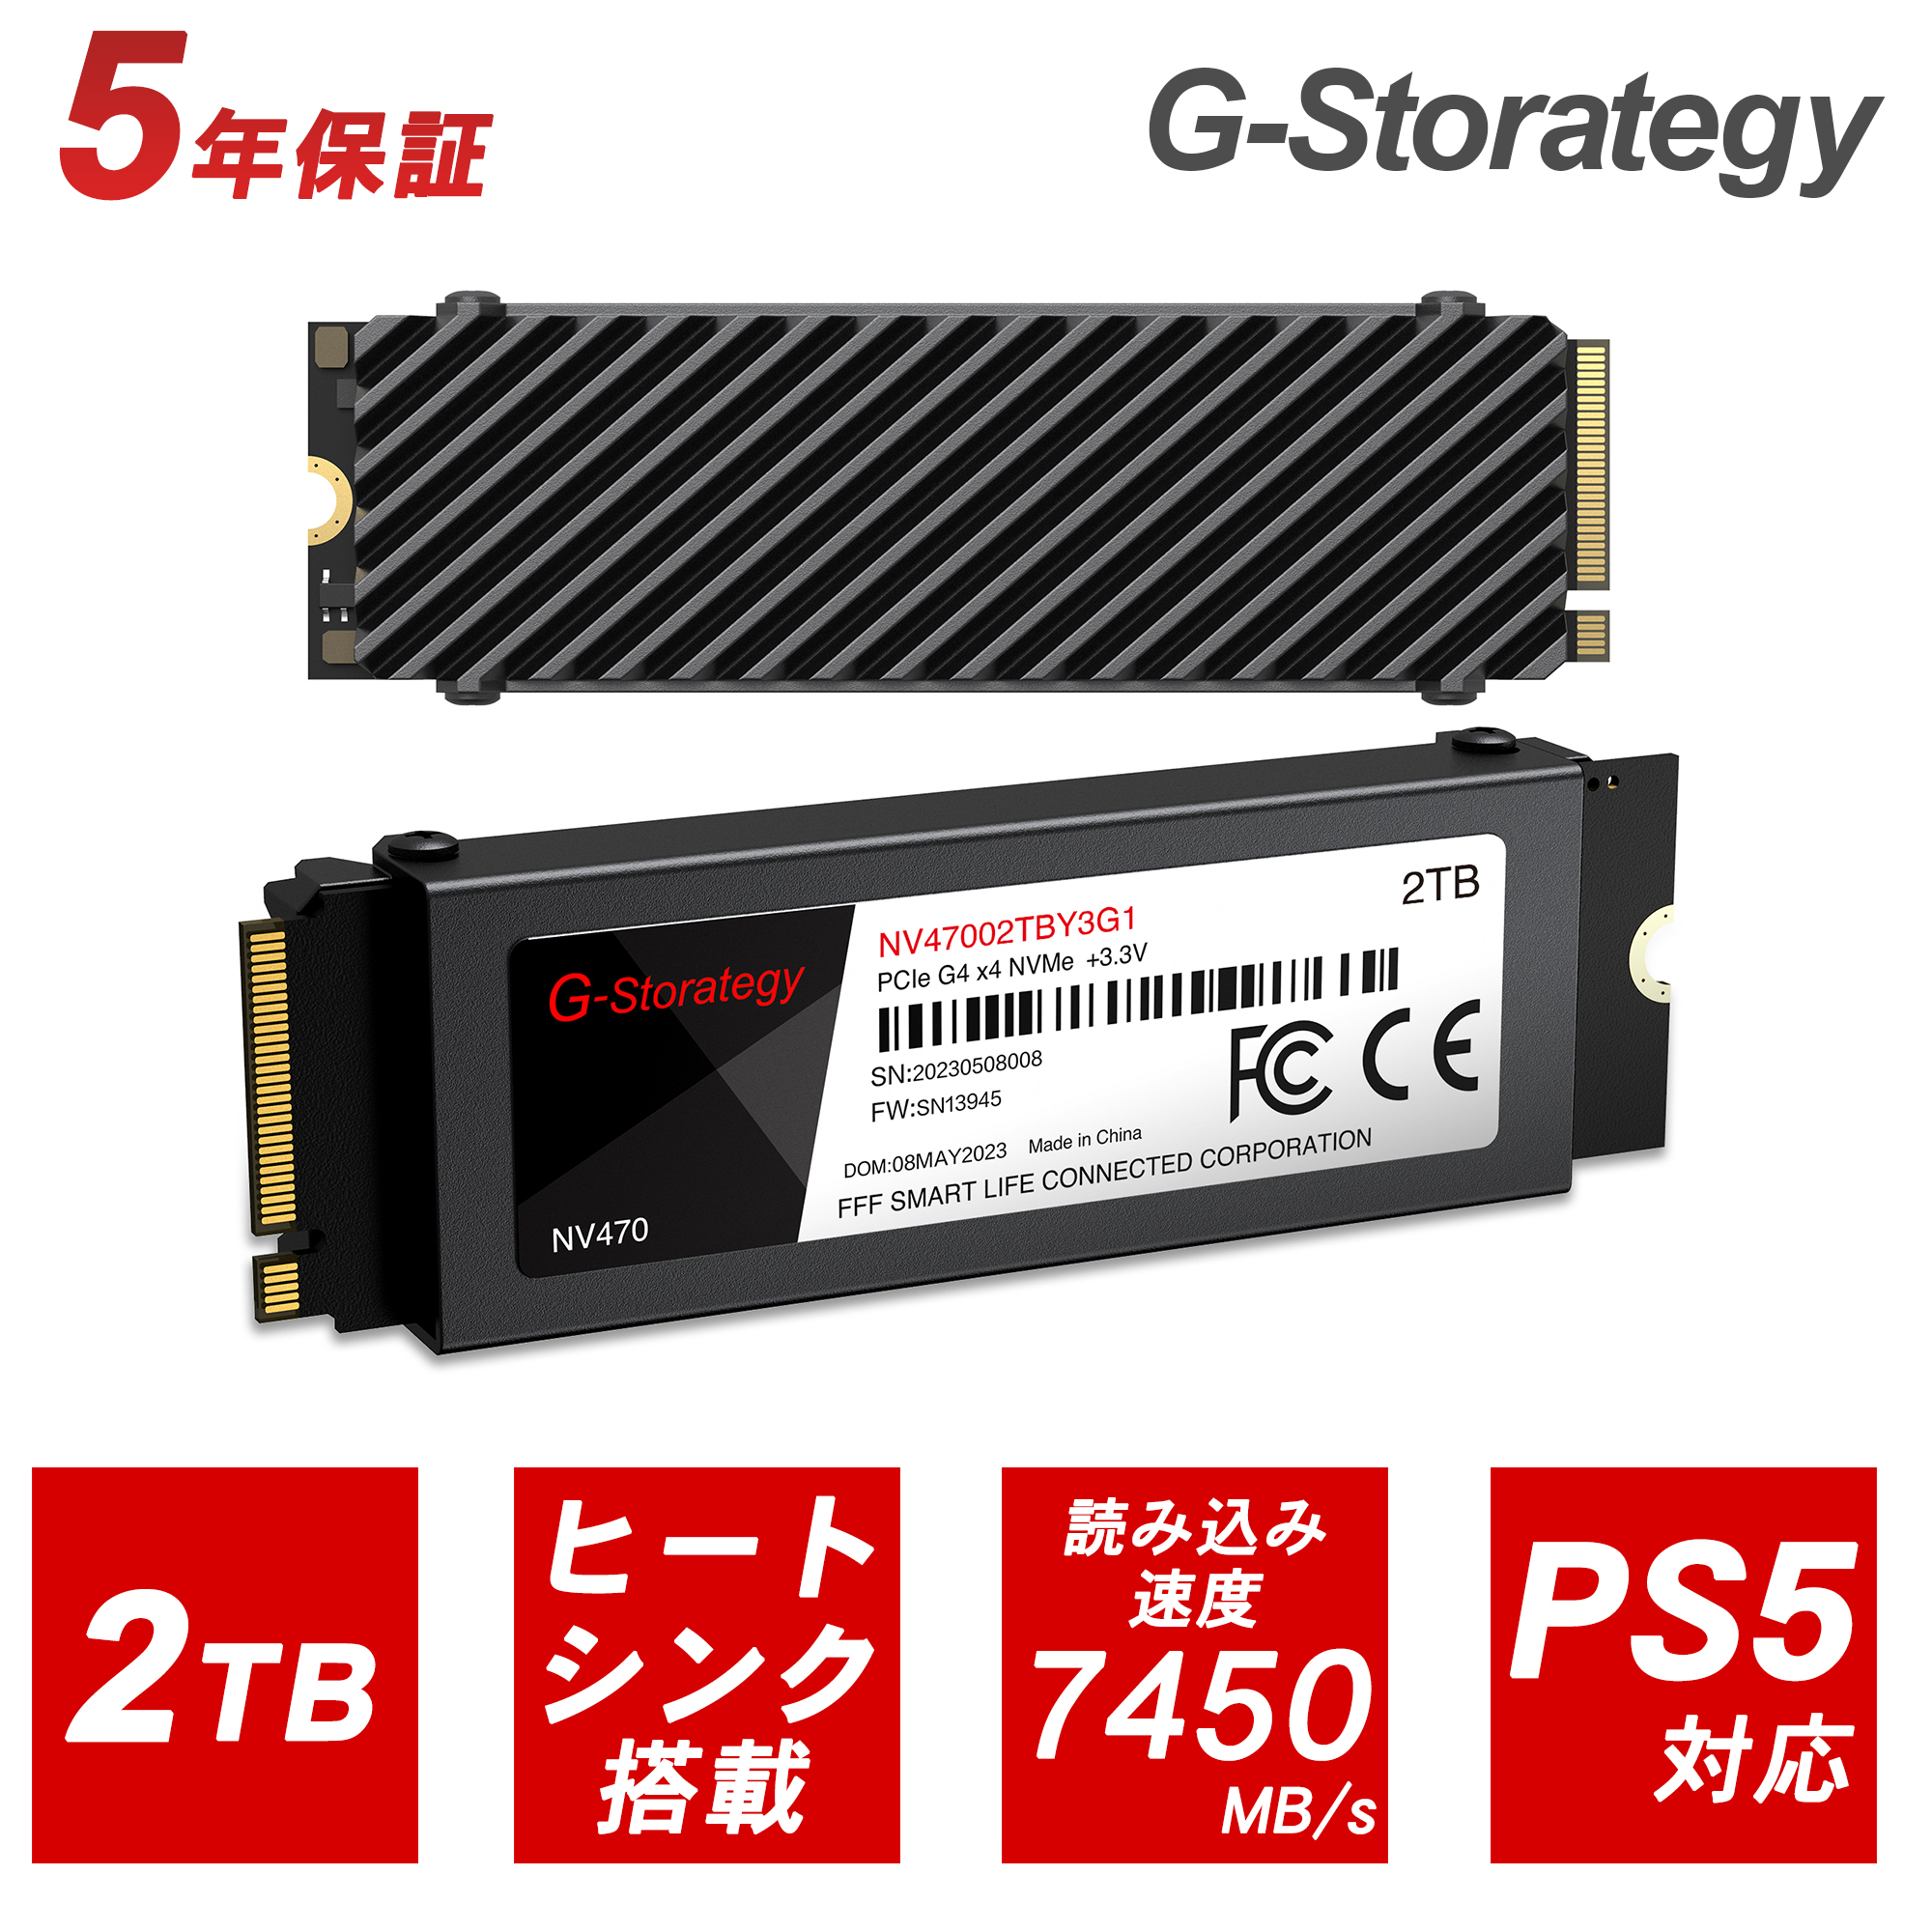 SSD 2TB ヒートシンク搭載 内蔵 M.2 2280 TLC NAND PS5 増設 読み取り7450MB s 書き込み6750MB s 高耐久性 NVMe デスクトップPC ノートPC かんたん取付け 5年間保証 新品 送料無料 G-Storategy NV47002TBY3G1